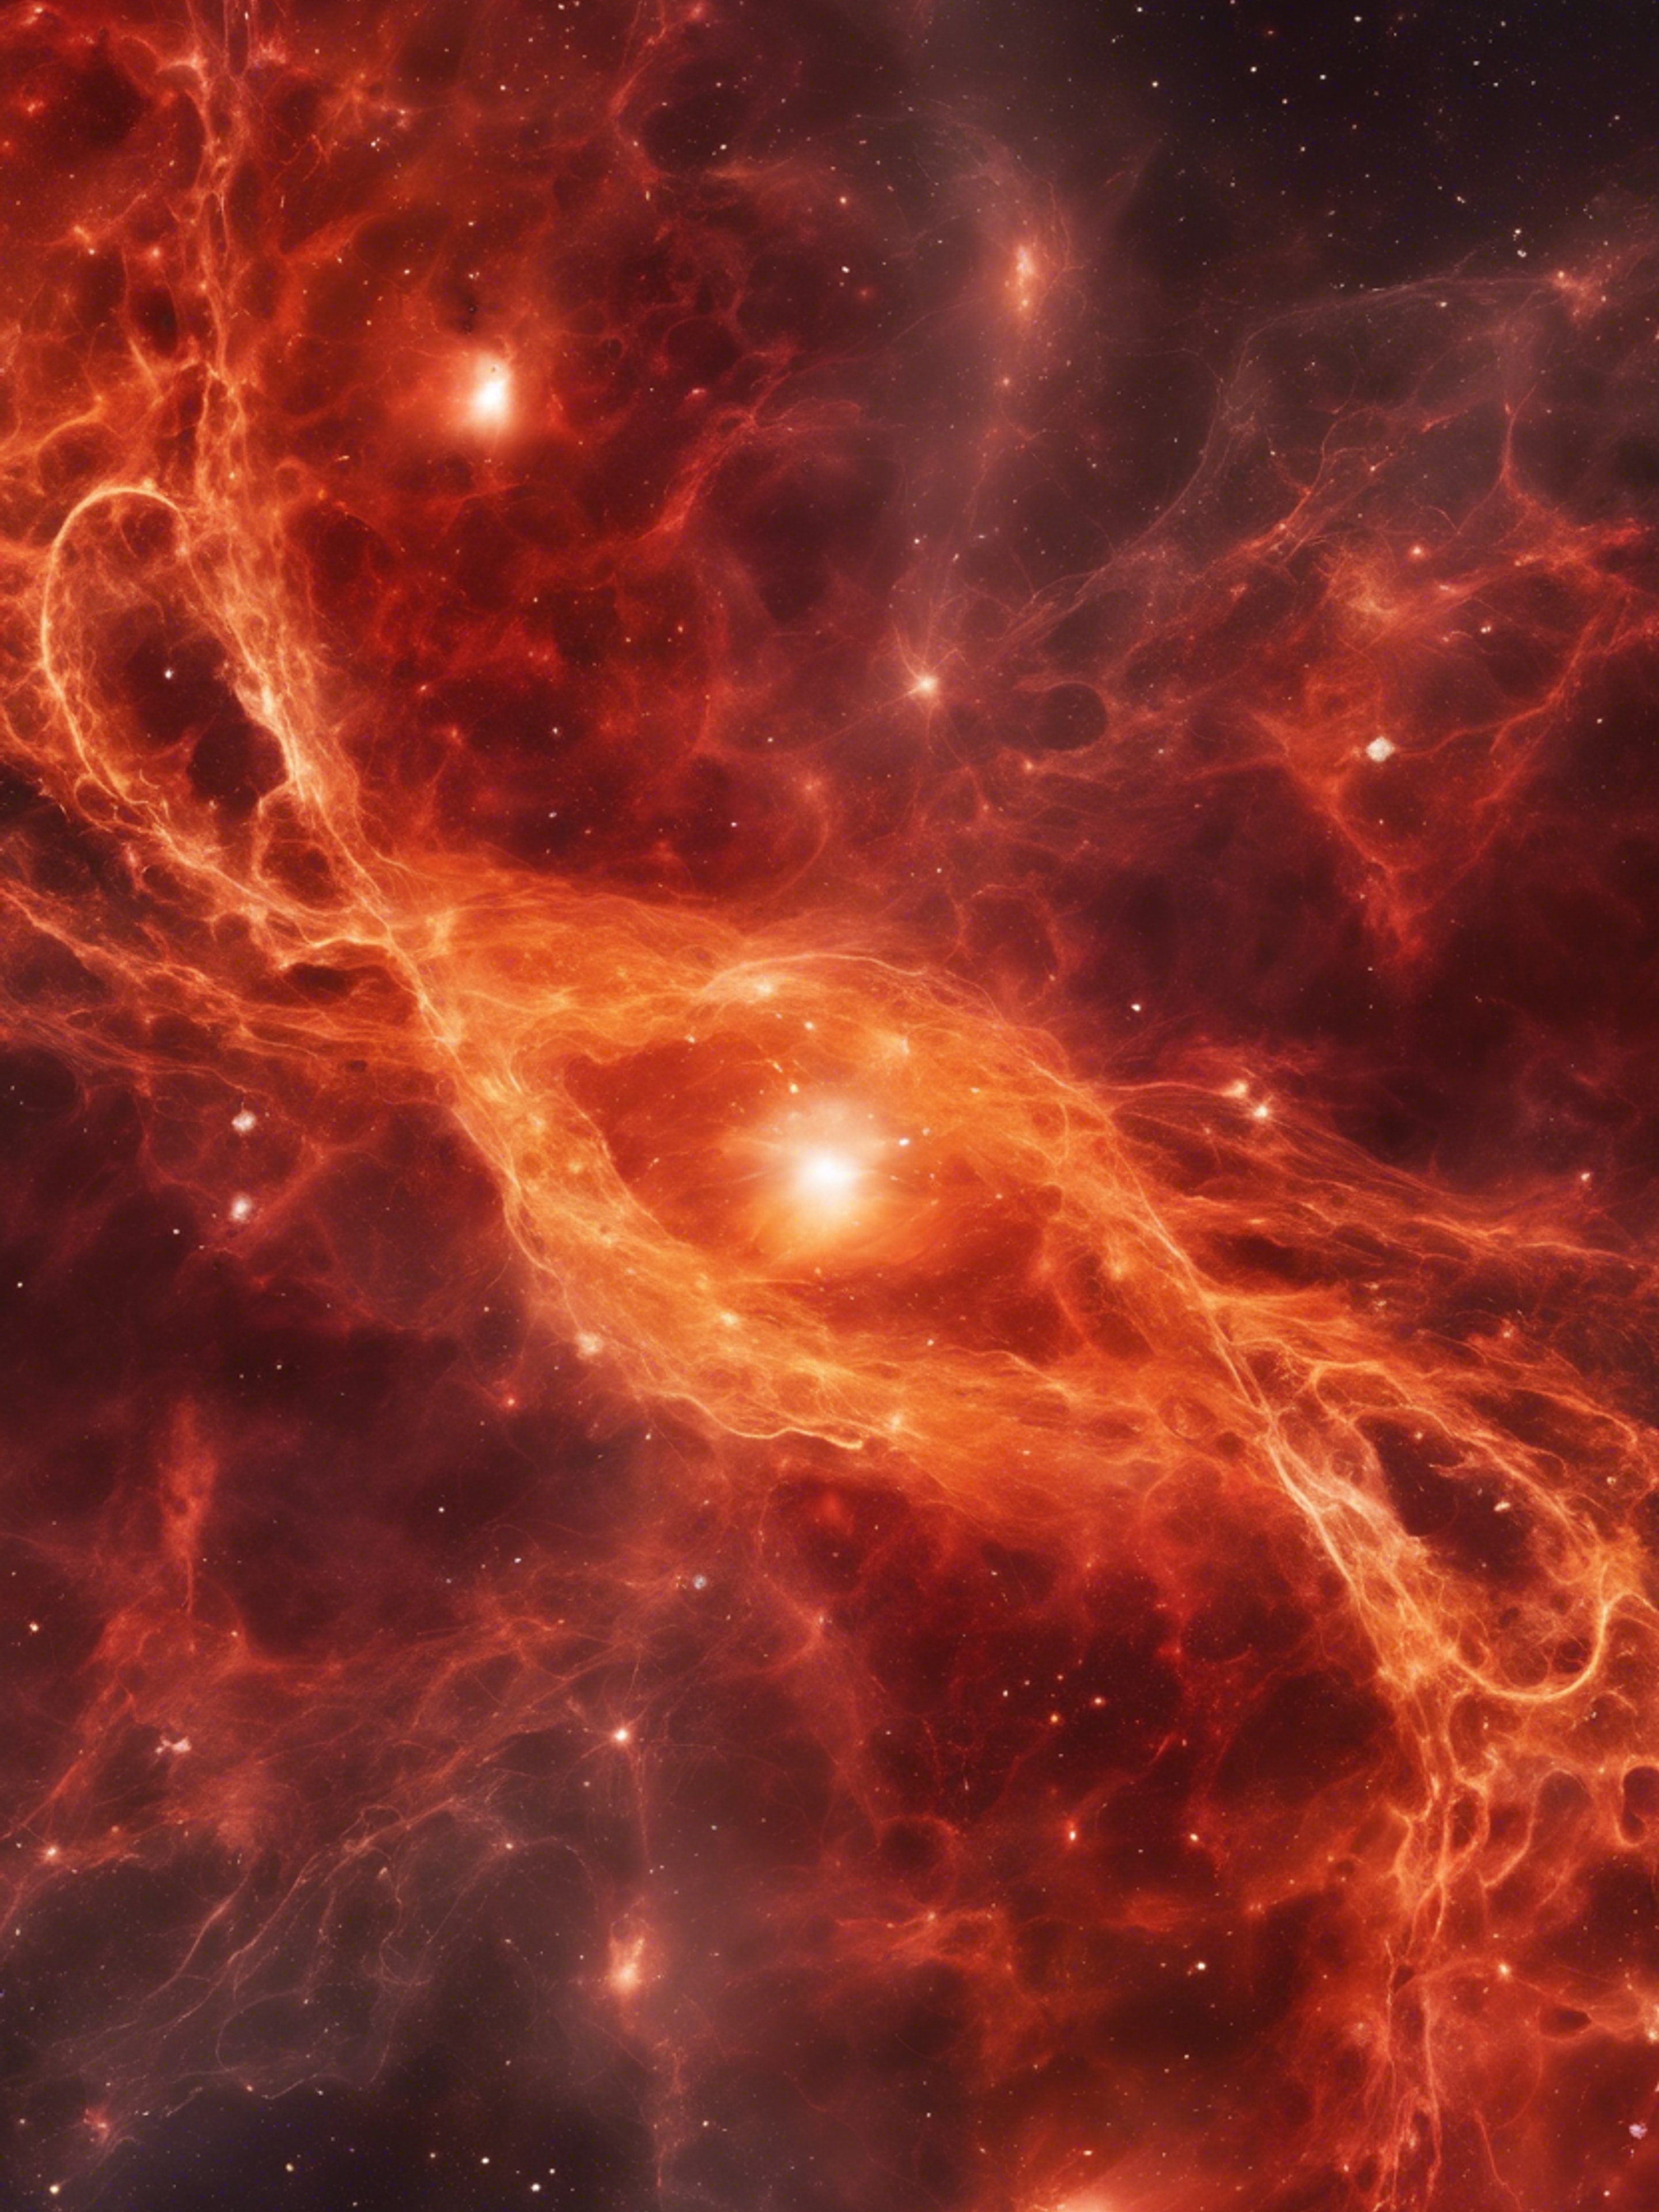 Red and orange nebula moving in chaos to form an alluring abstract pattern, lost in an endless loop. Tapeta[8b81d5815a2d445c9bb4]